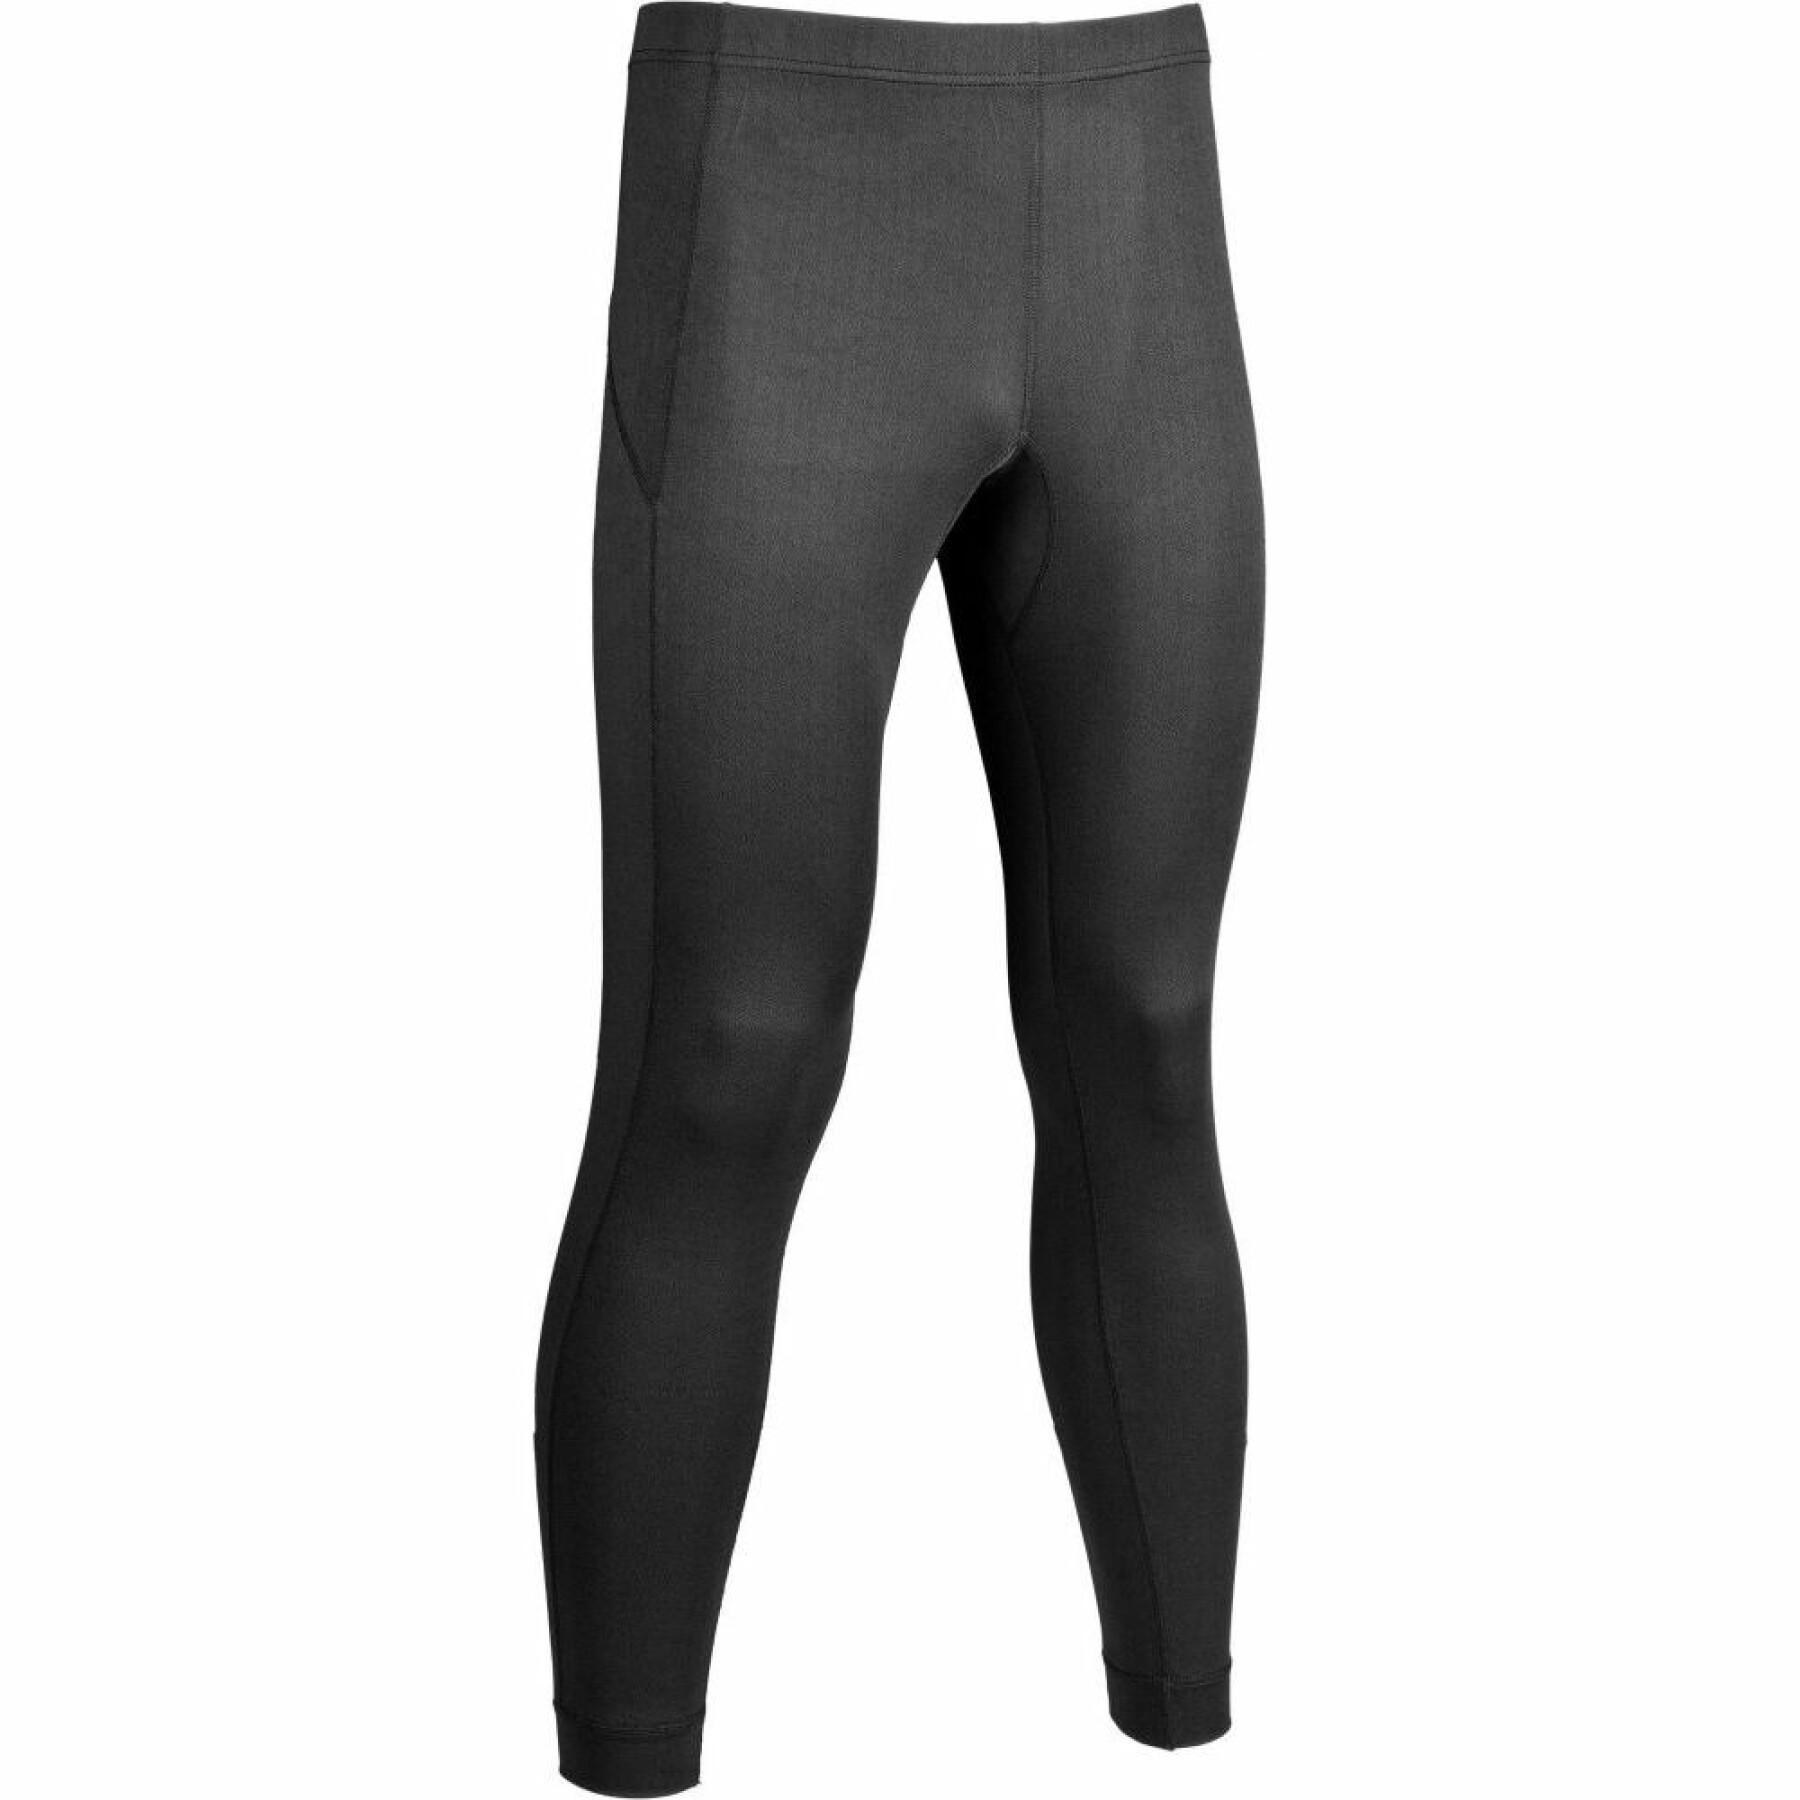 Base layer cycling pants Fly Racing Lightweight 2021